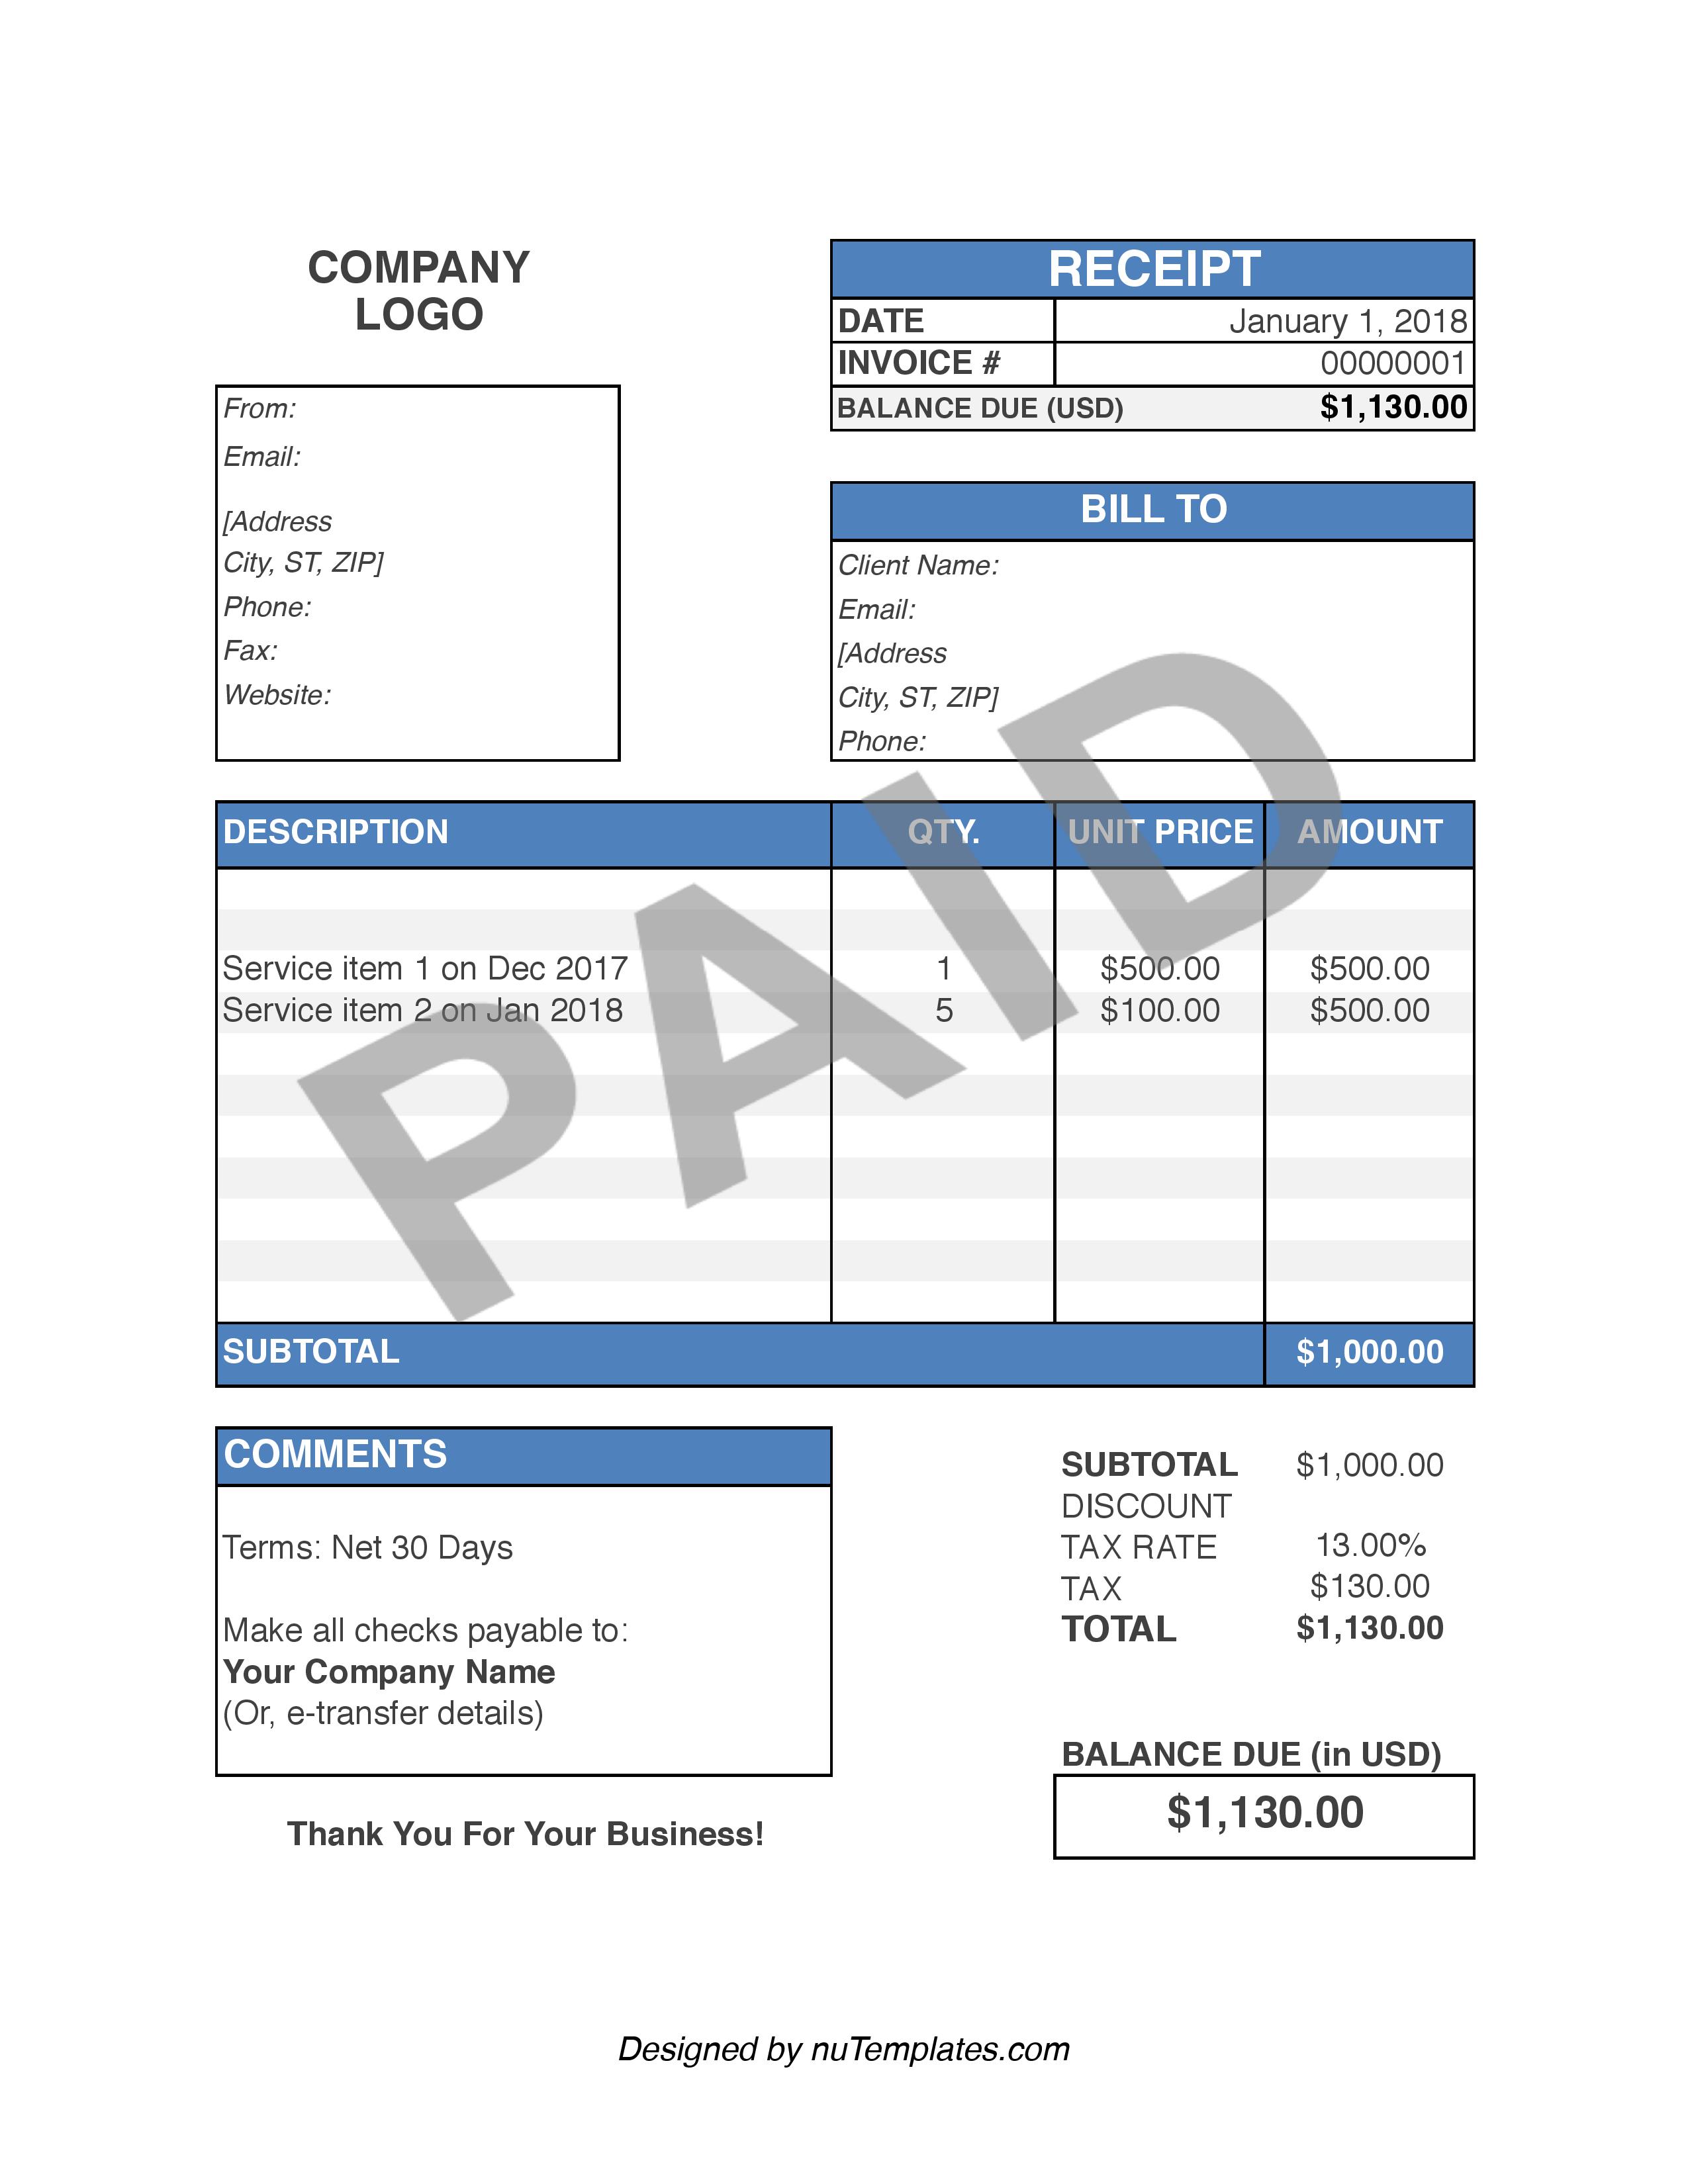 Template Receipt For Sevice Awesome Printable Receipt Templates